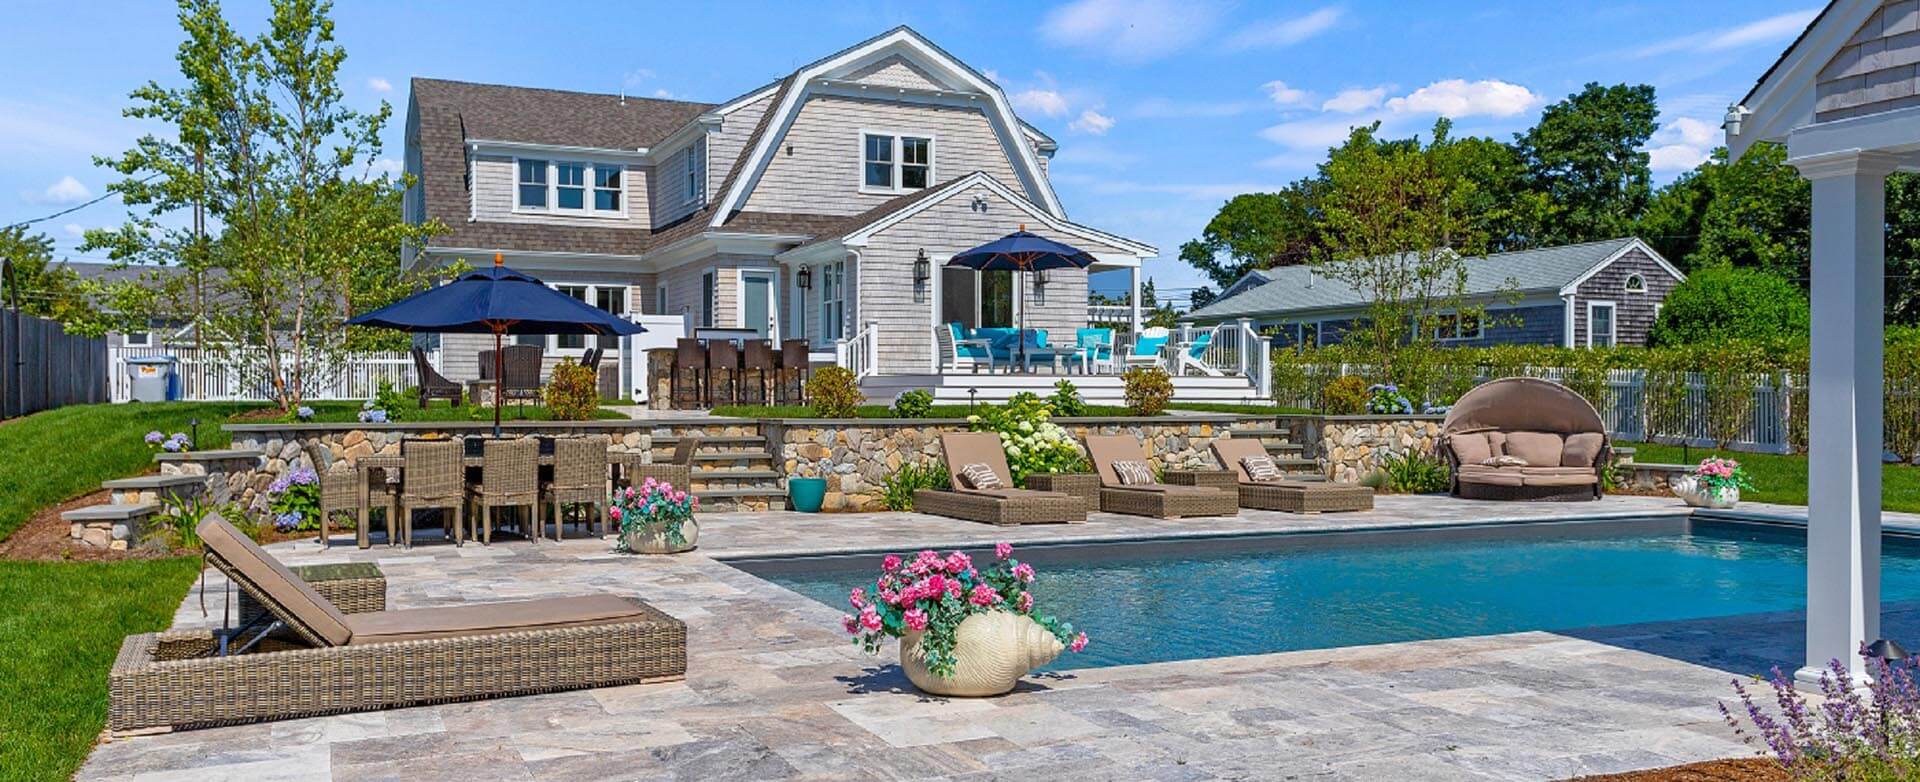 Cape Cod Rentals with a pool